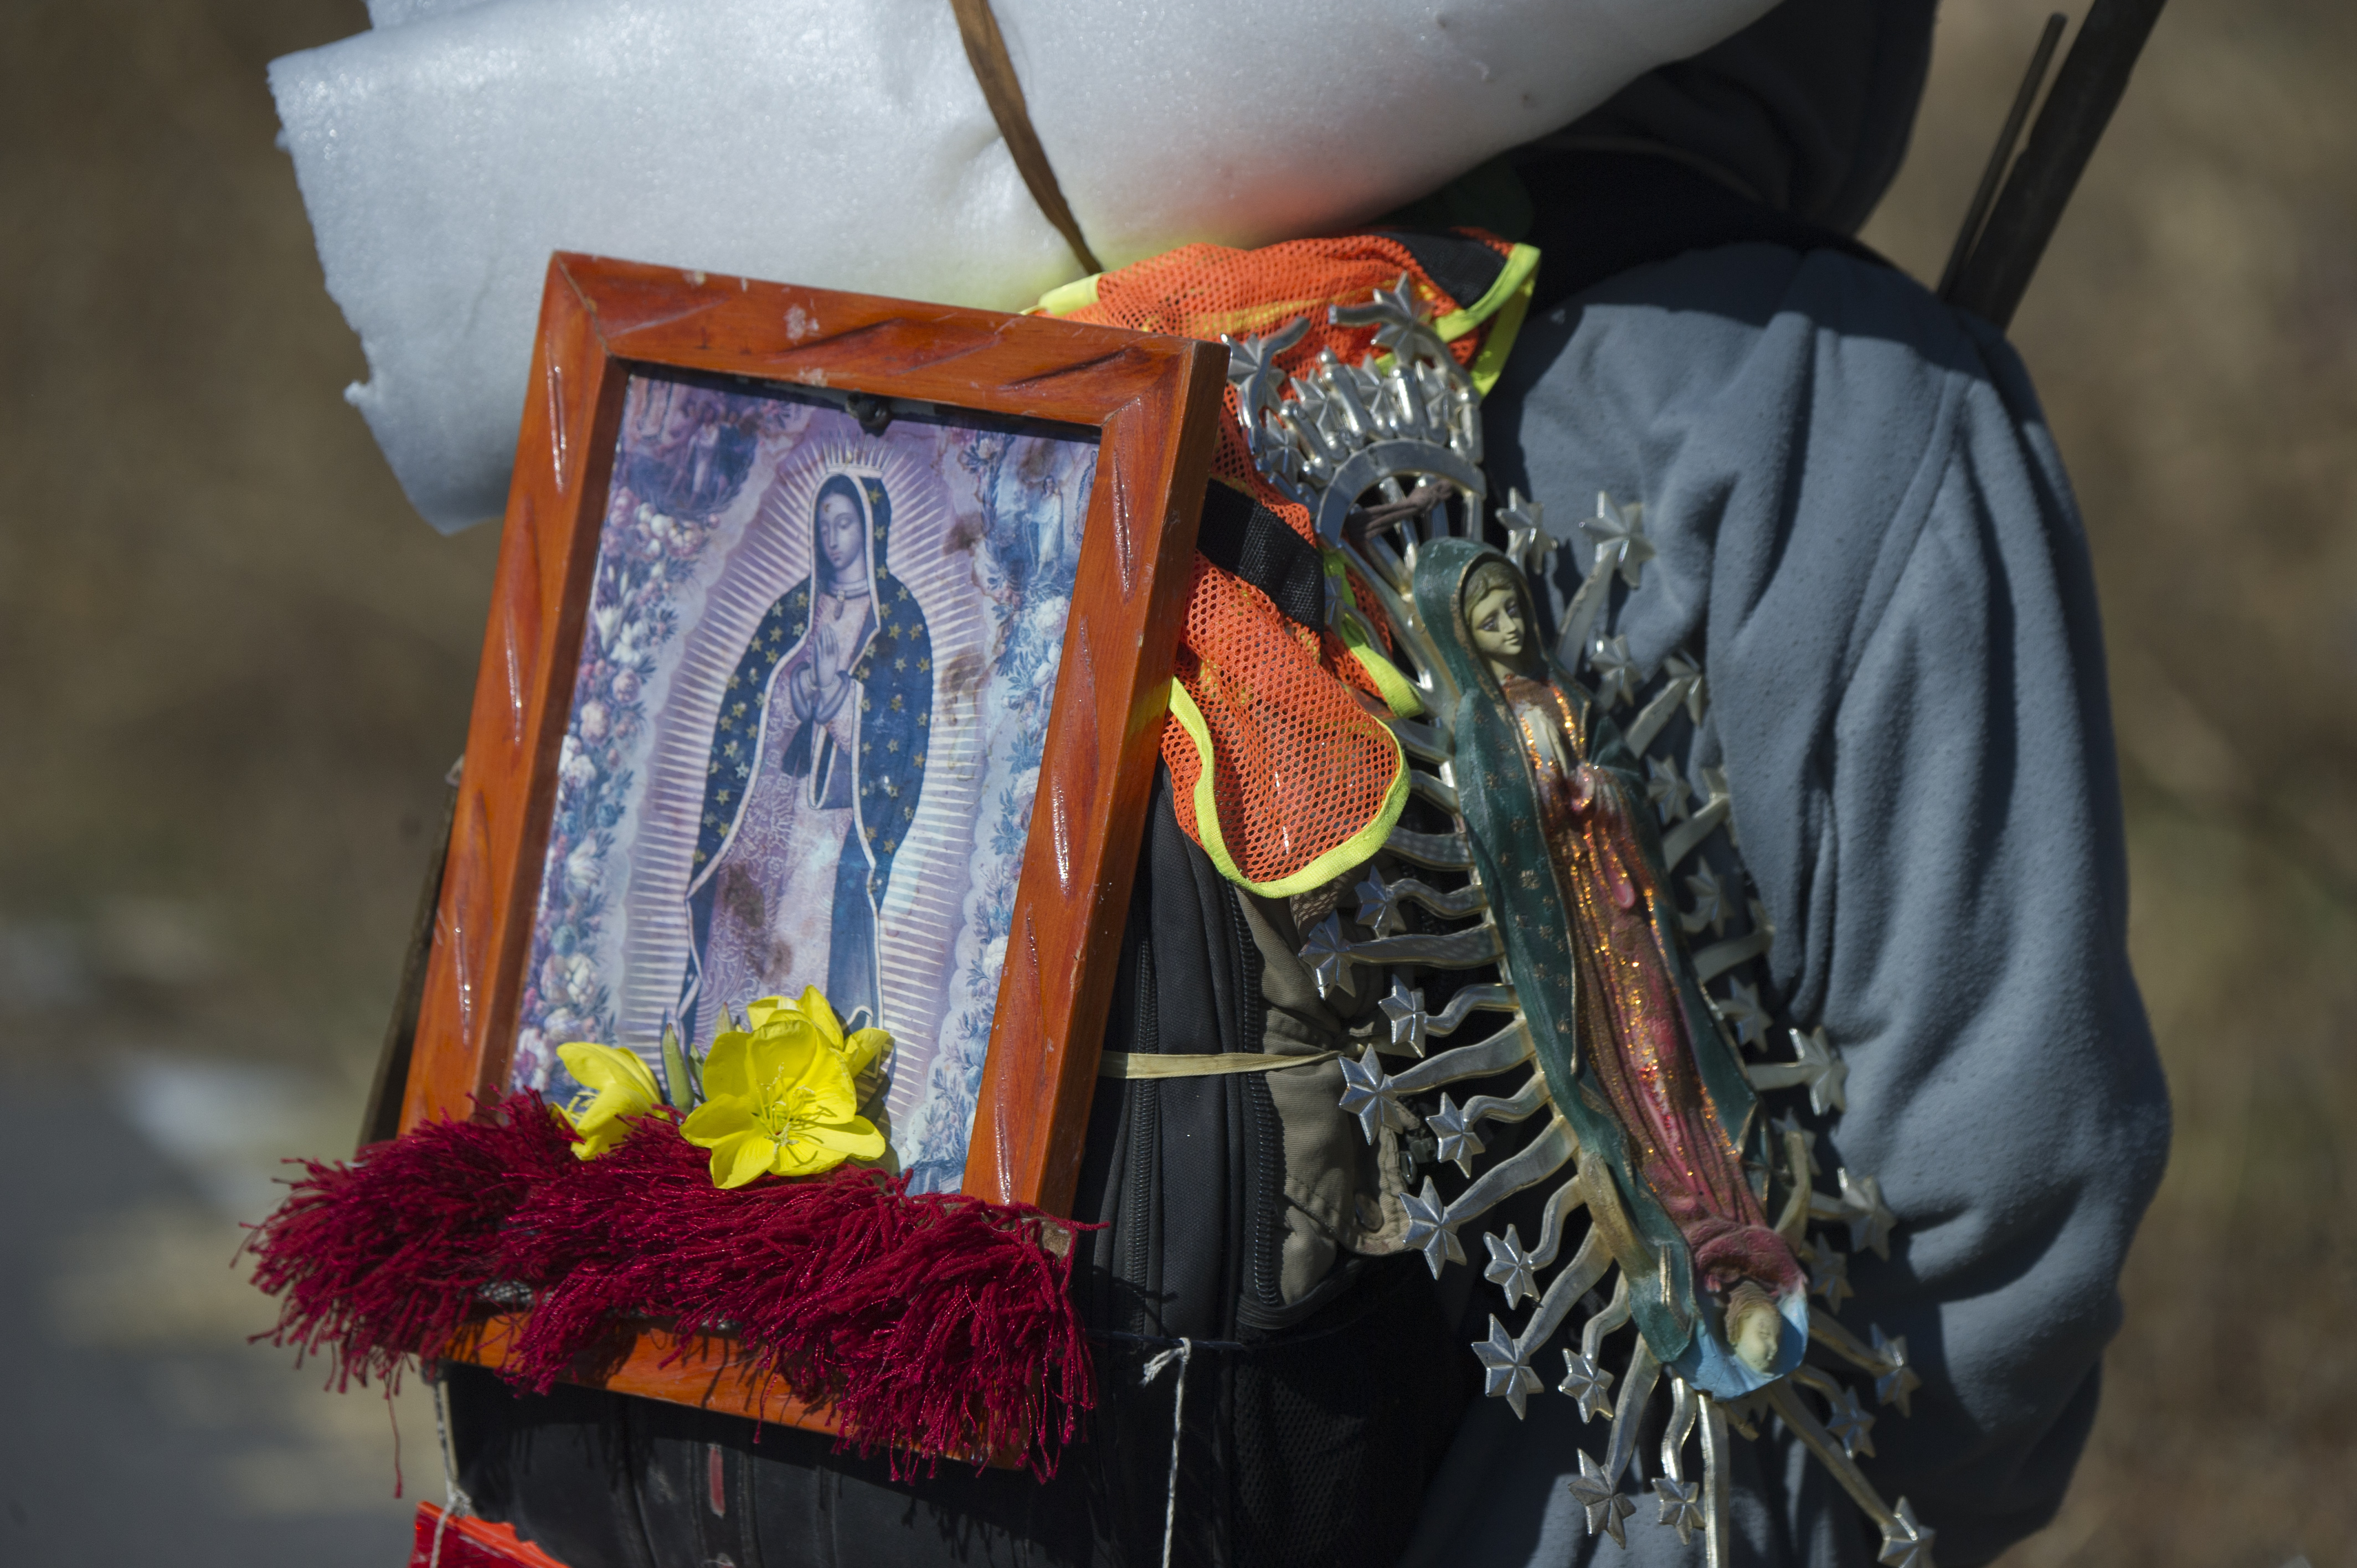 The victims of the fatal accident were pilgrims from Ajalpan, in Puebla.  (Claudio CRUZ / AFP)